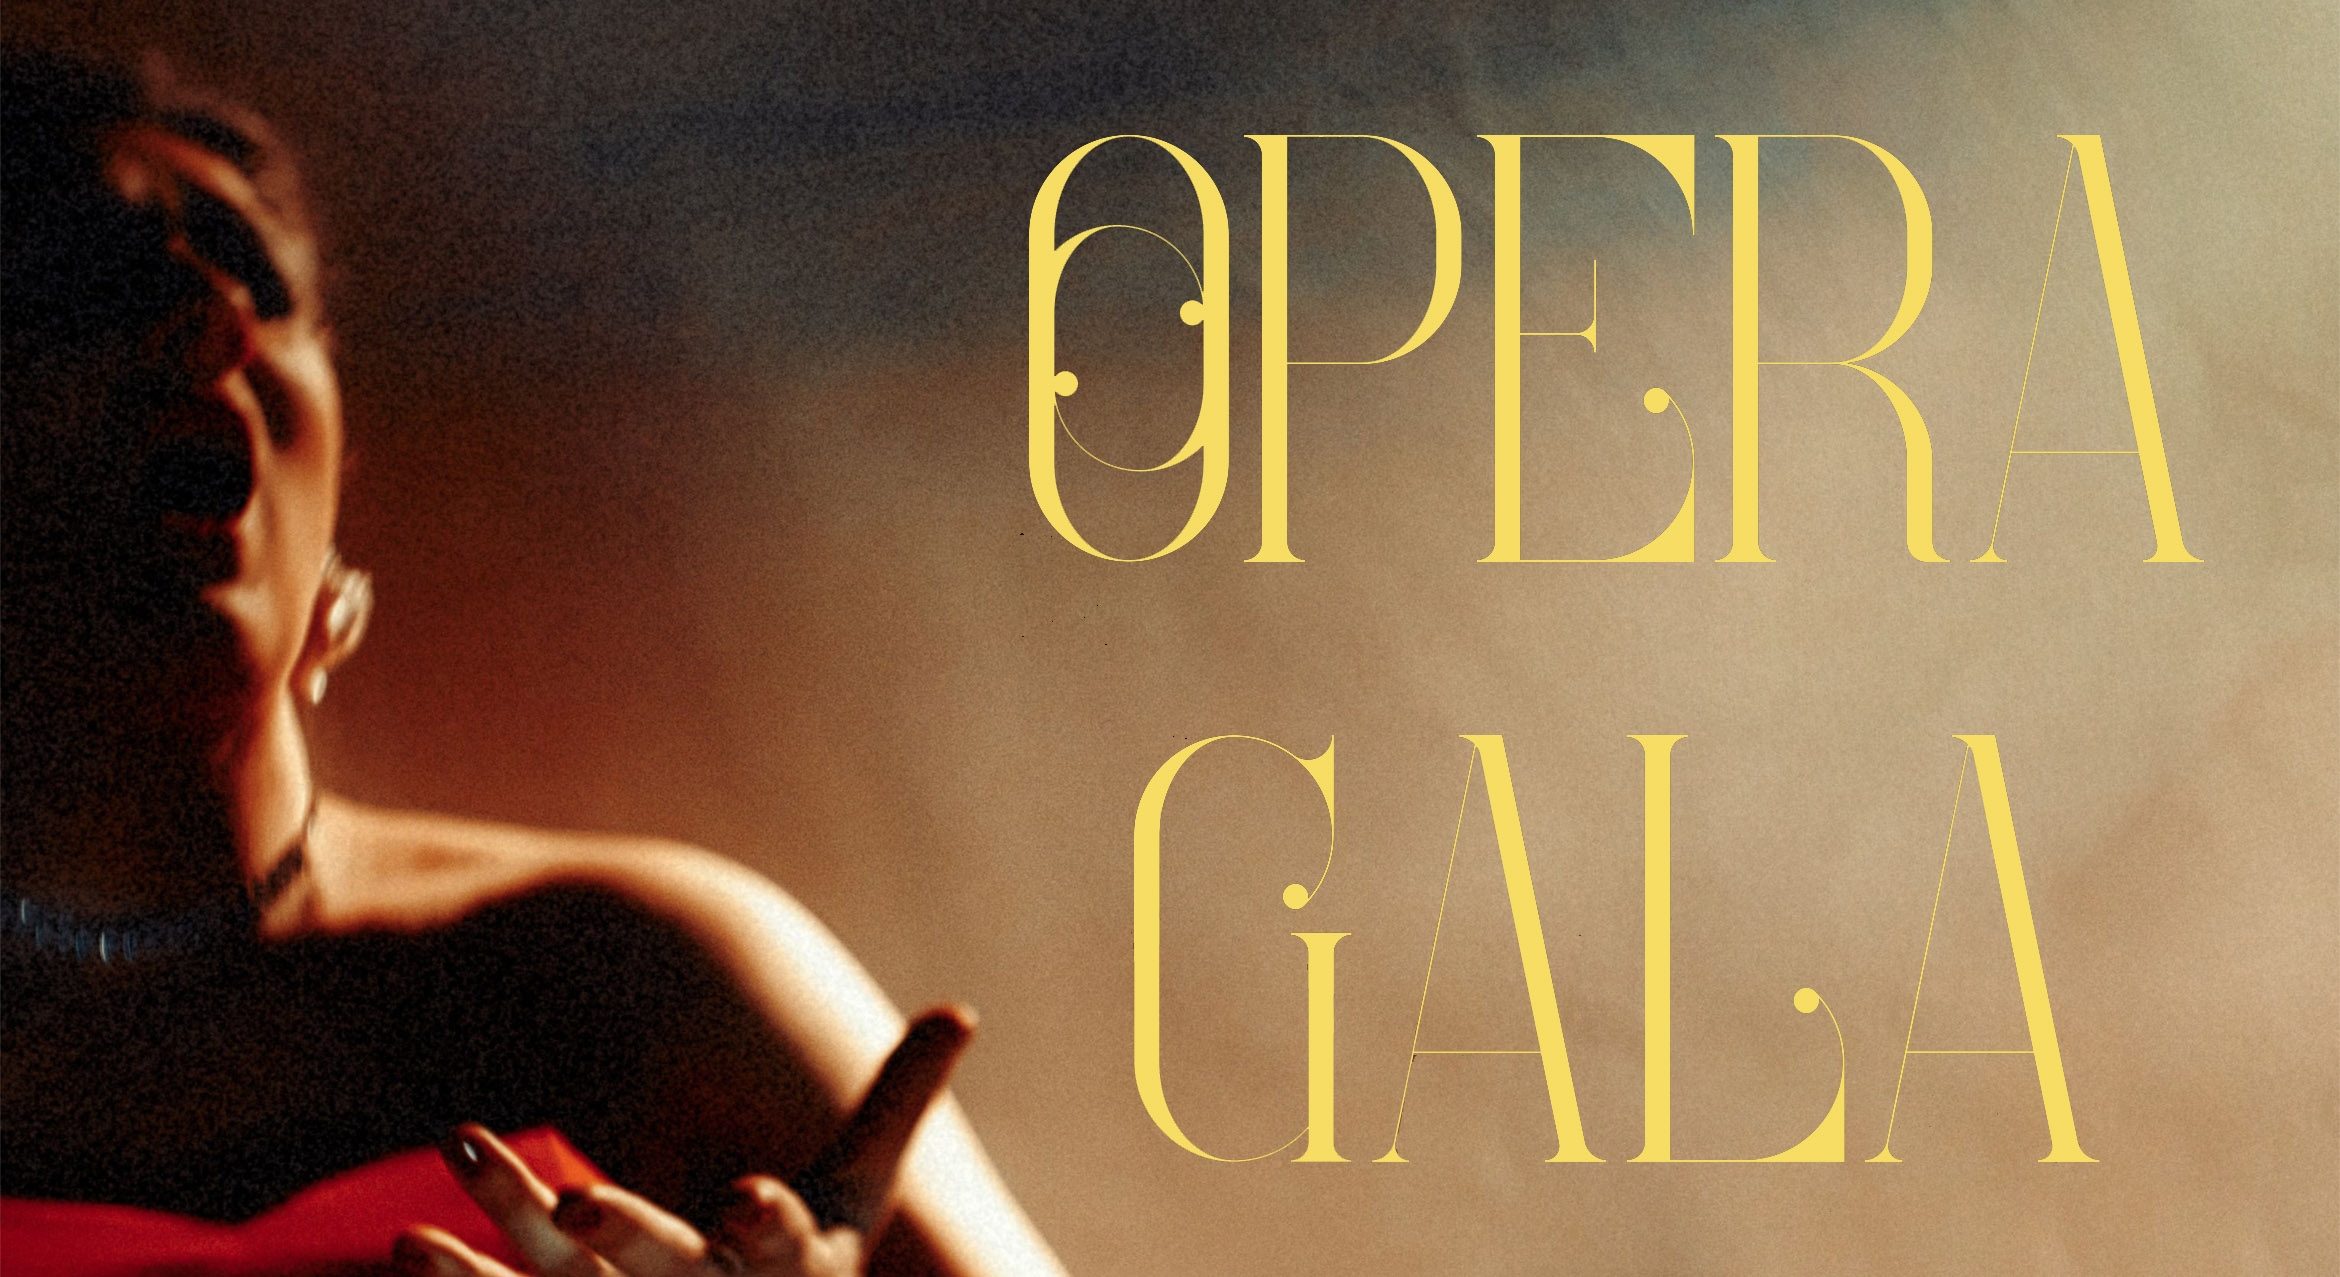 promotional flyer for the Opera Gala event 